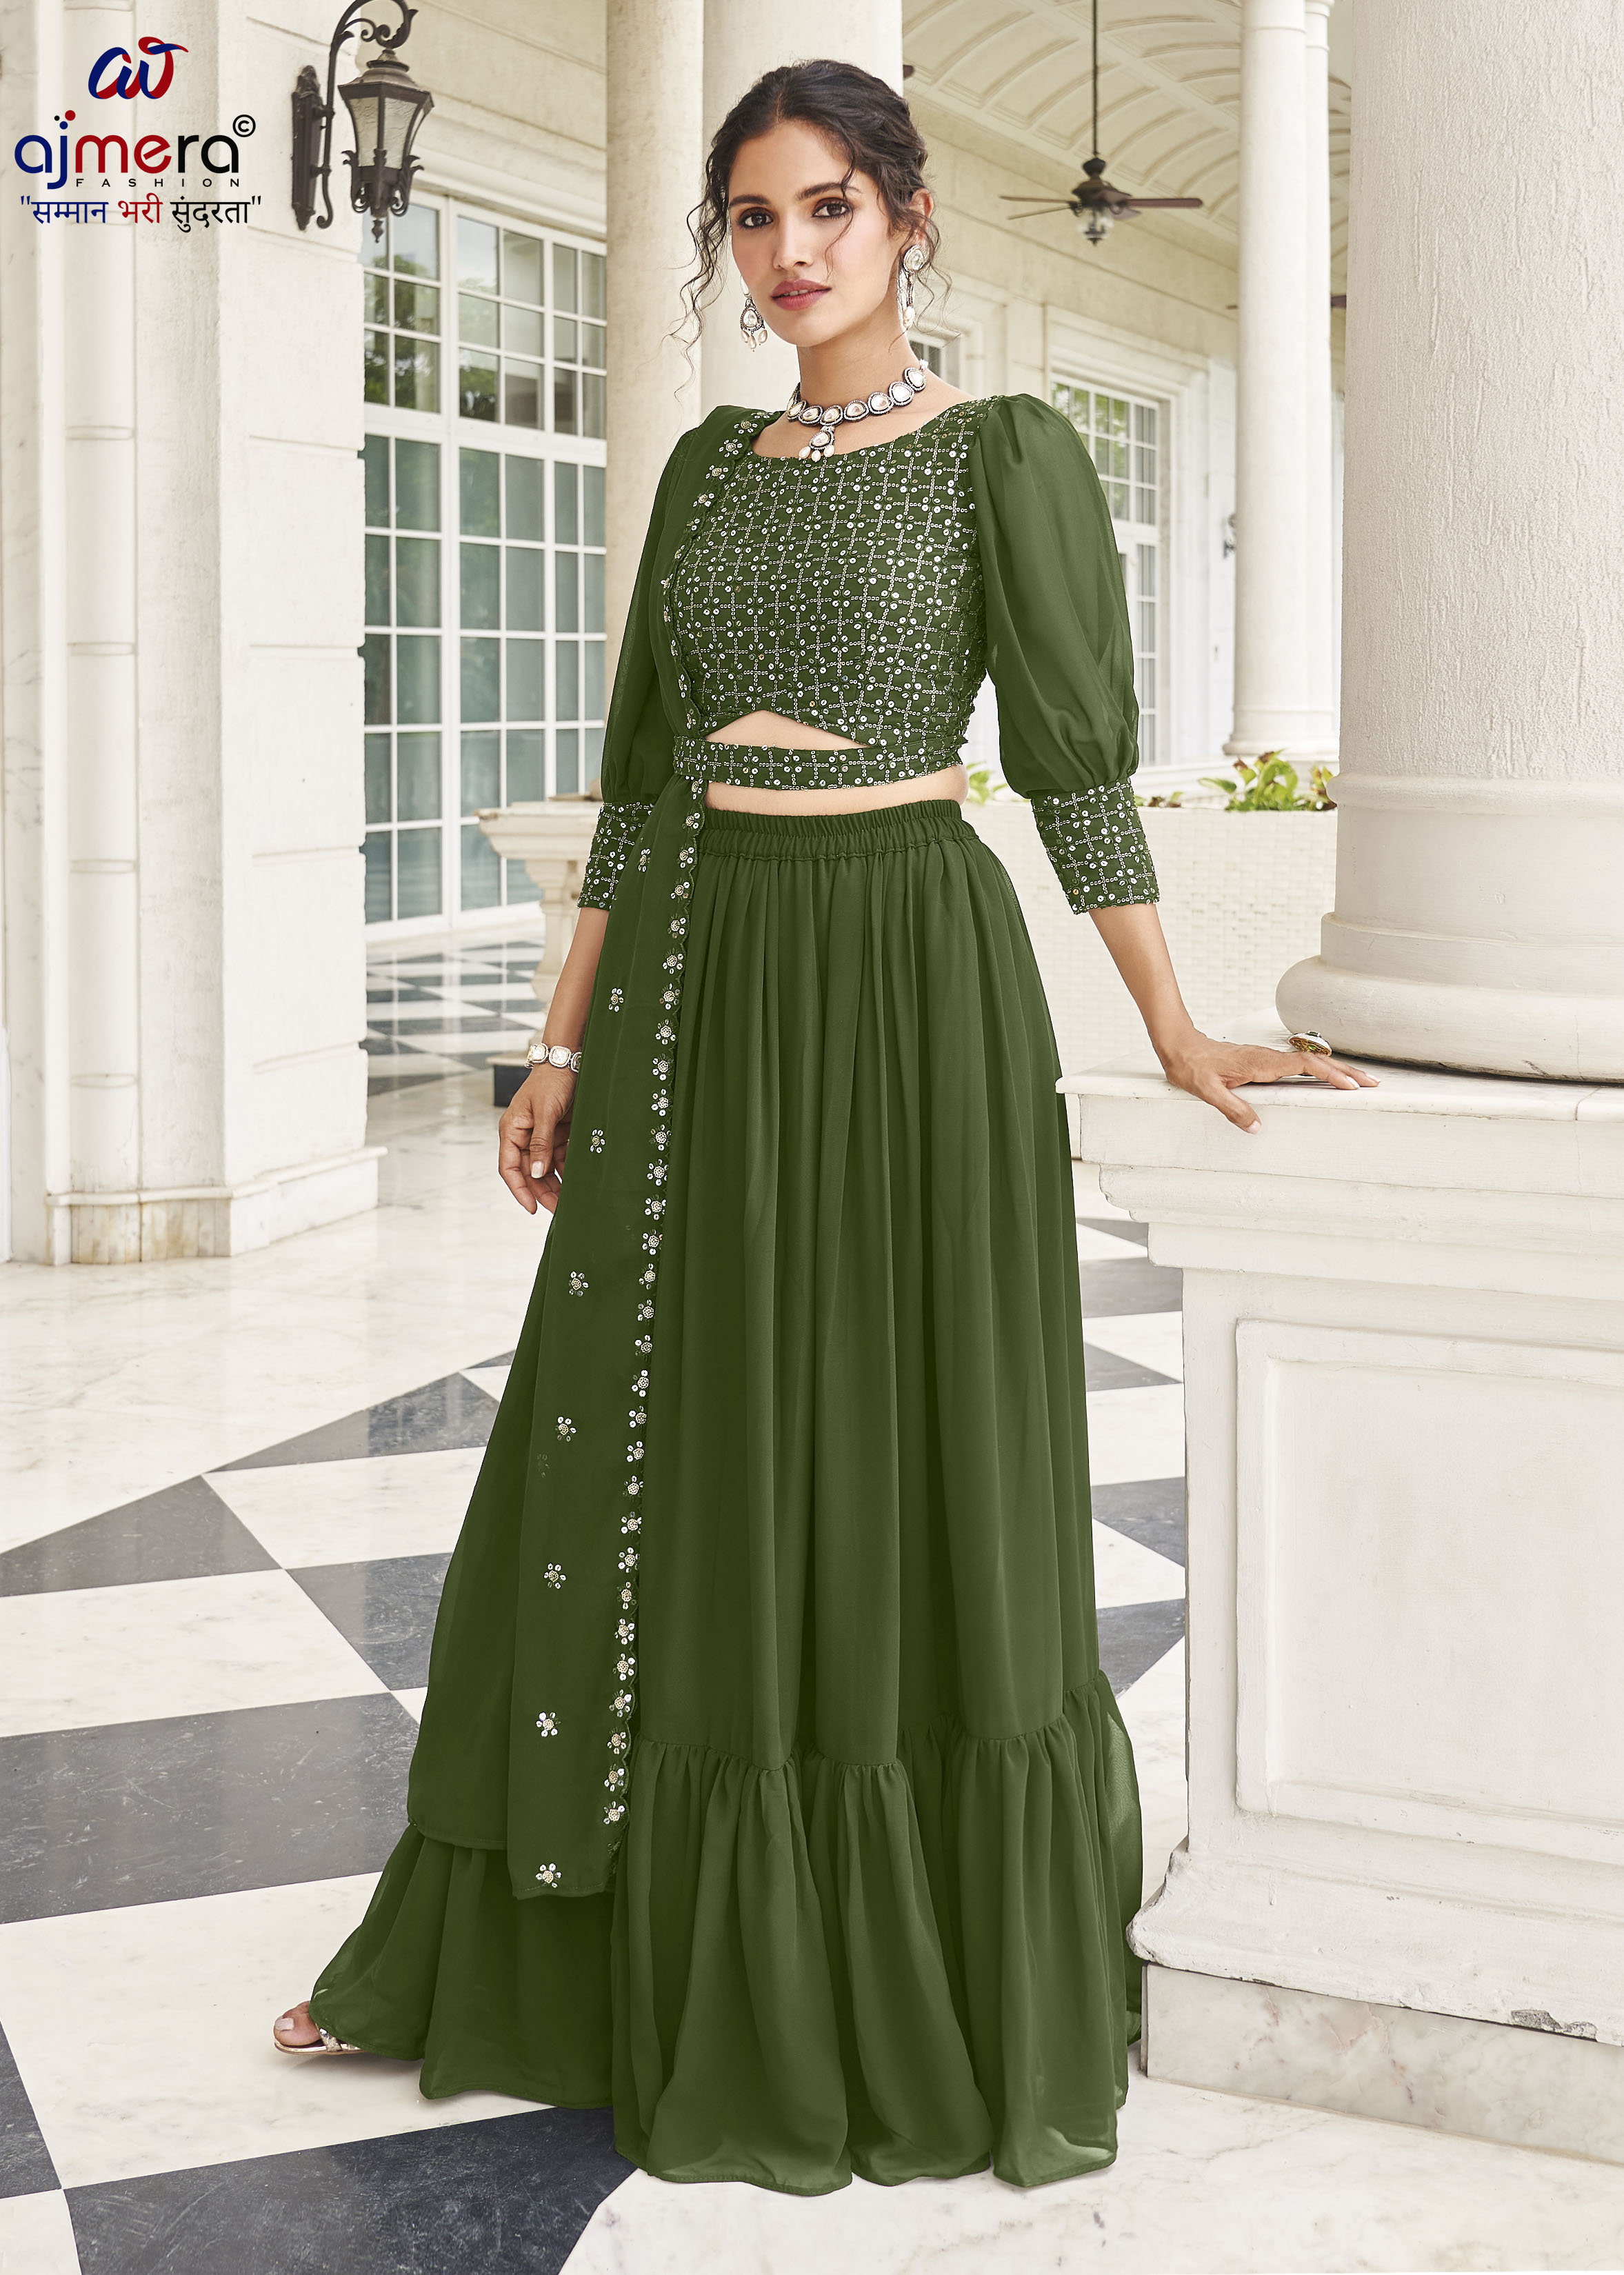 Partywear Lahenga Manufacturers, Suppliers in Rajasthan